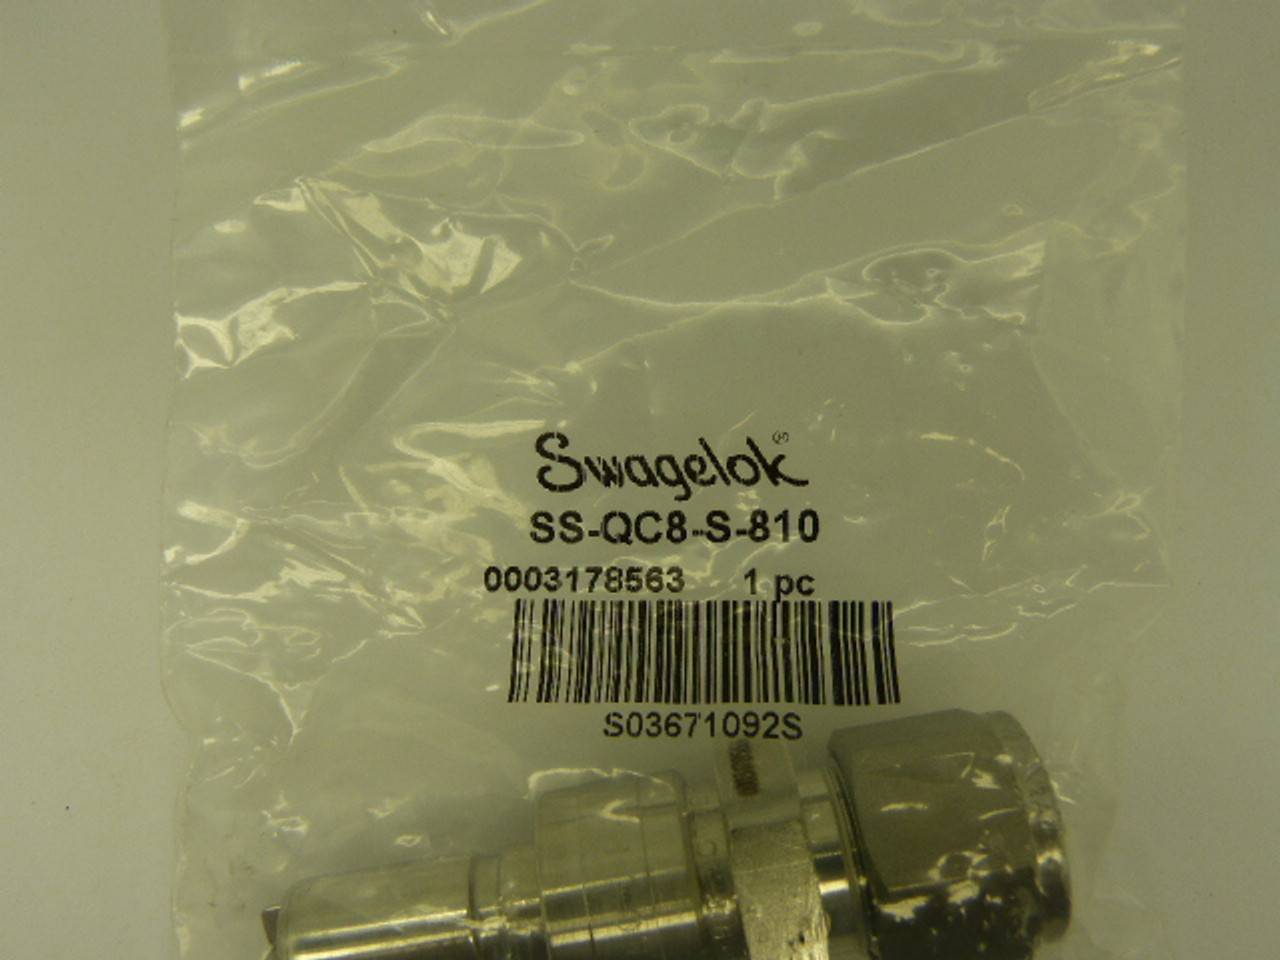 Swagelok SS-QC8-S-810 Quick Connect 1/2" Tube Fitting NWB